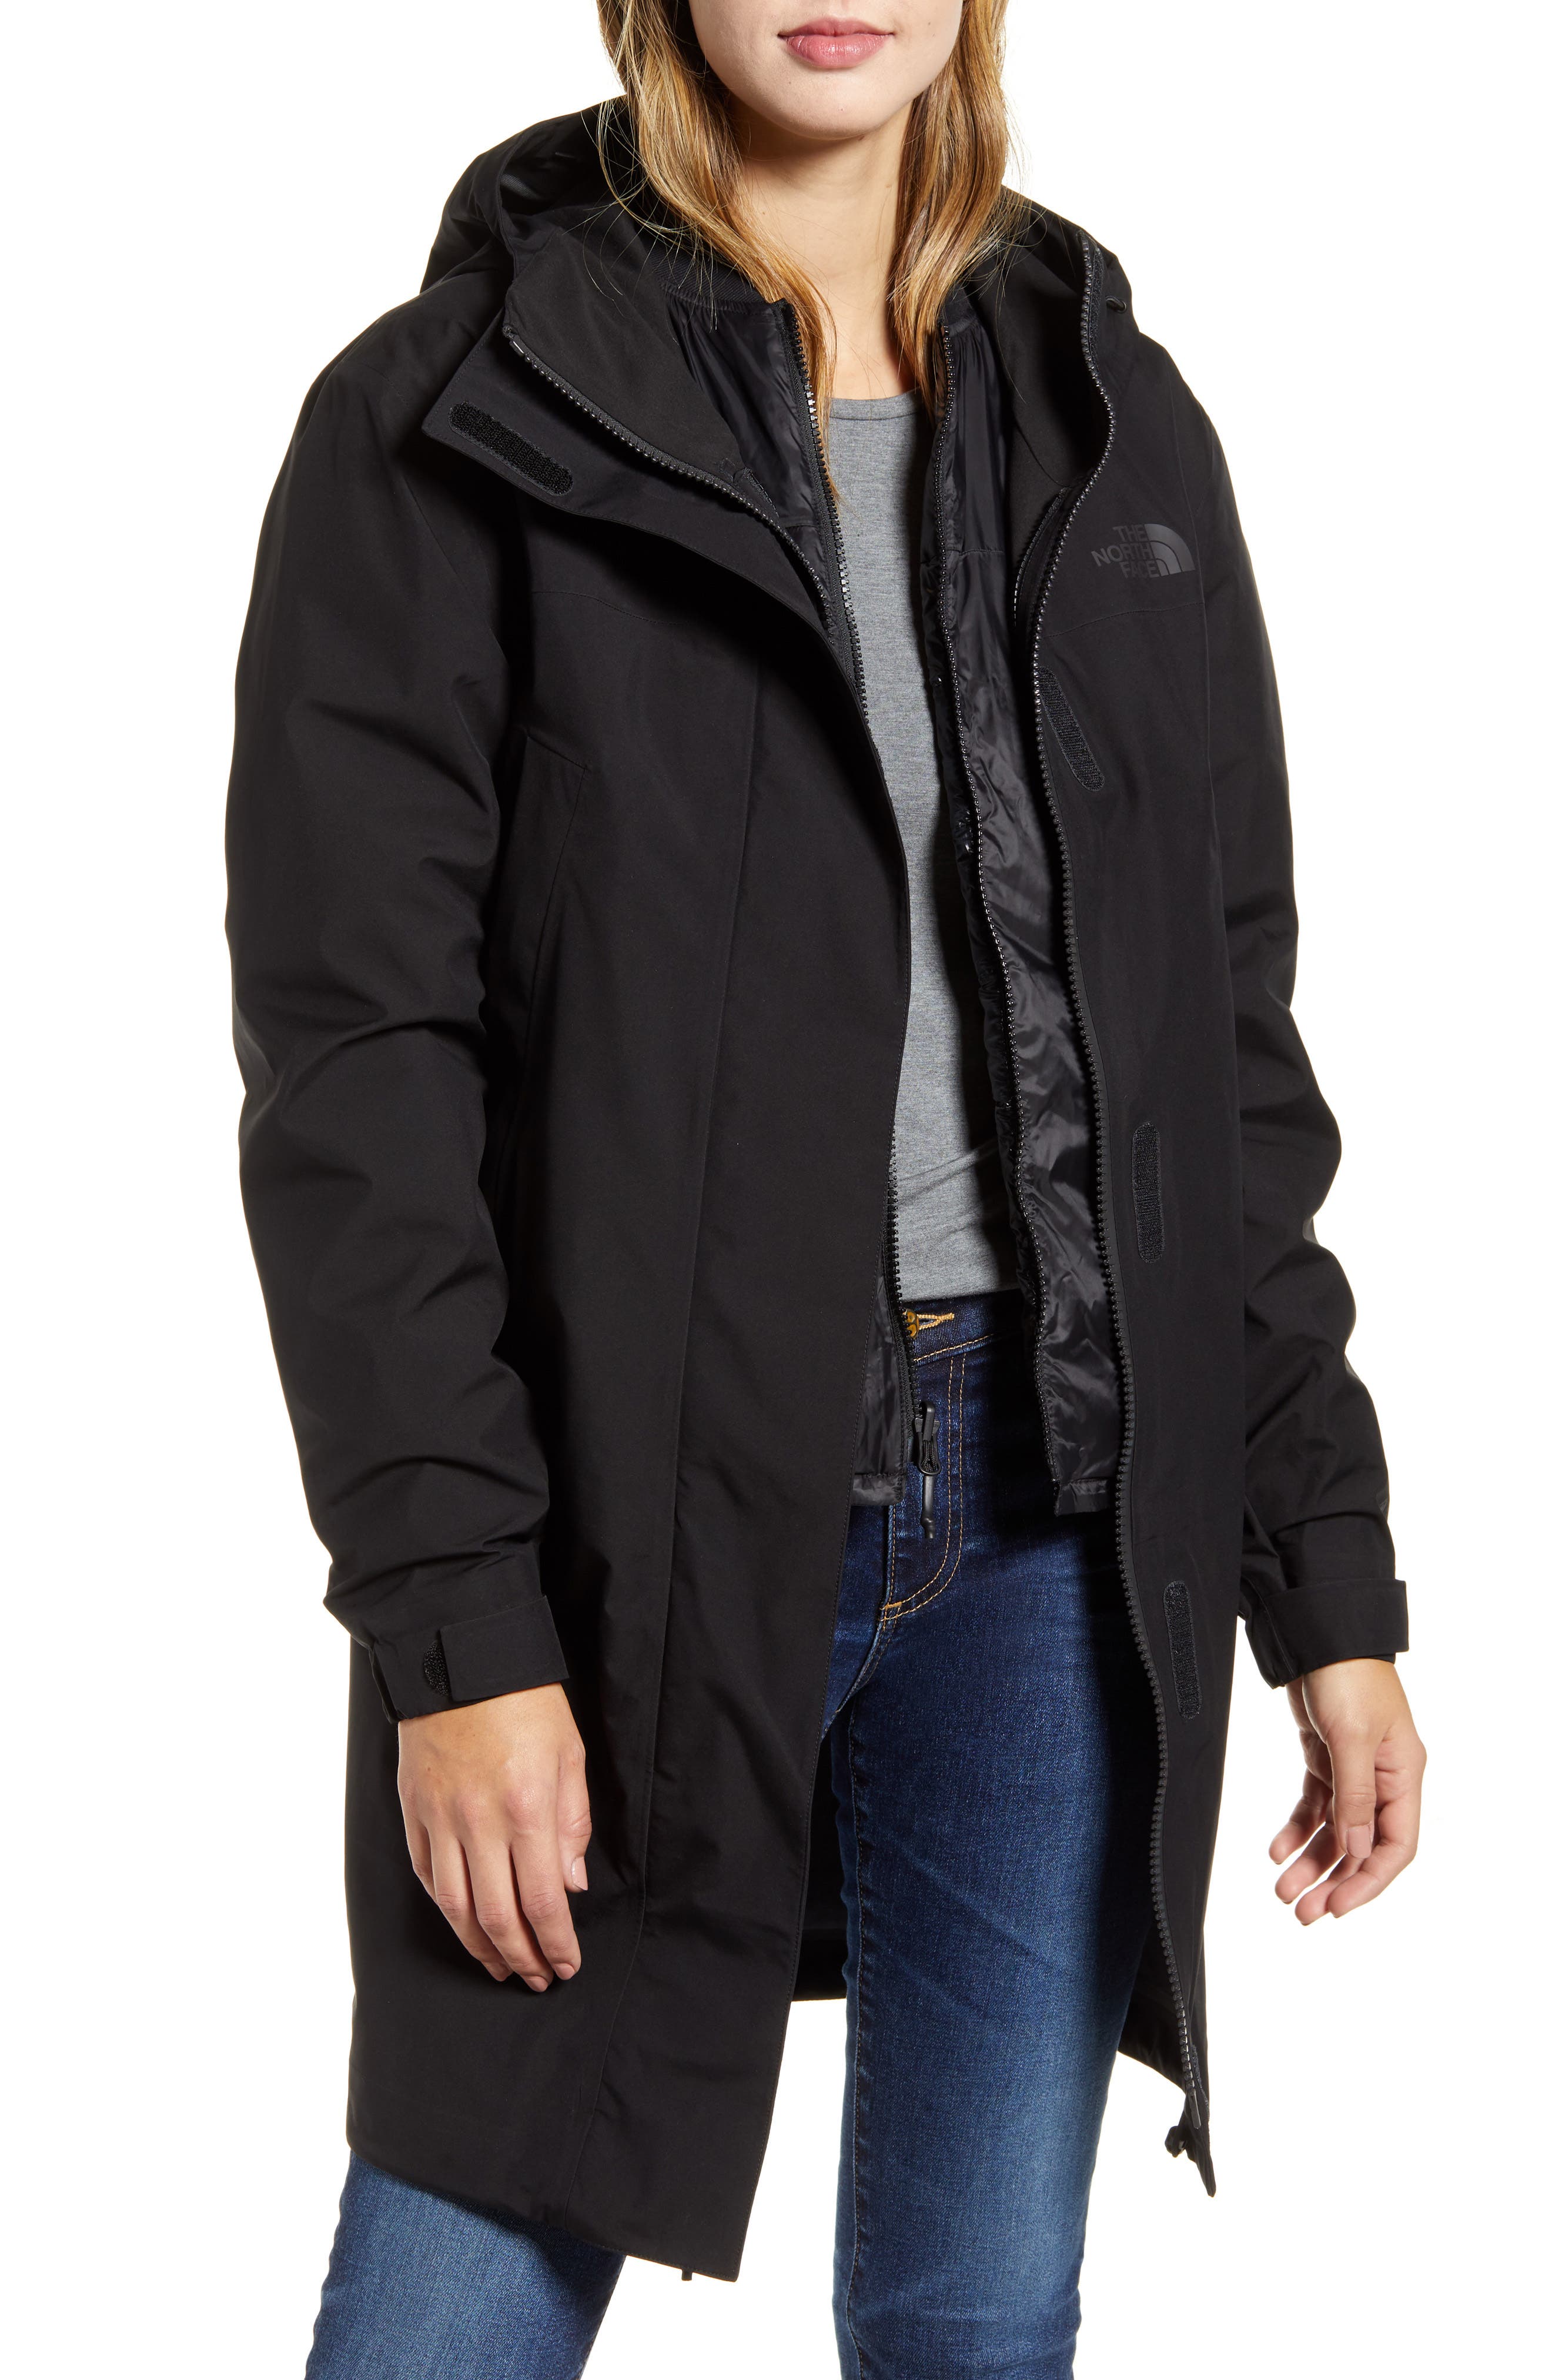 north face 3 in 1 gore tex jacket